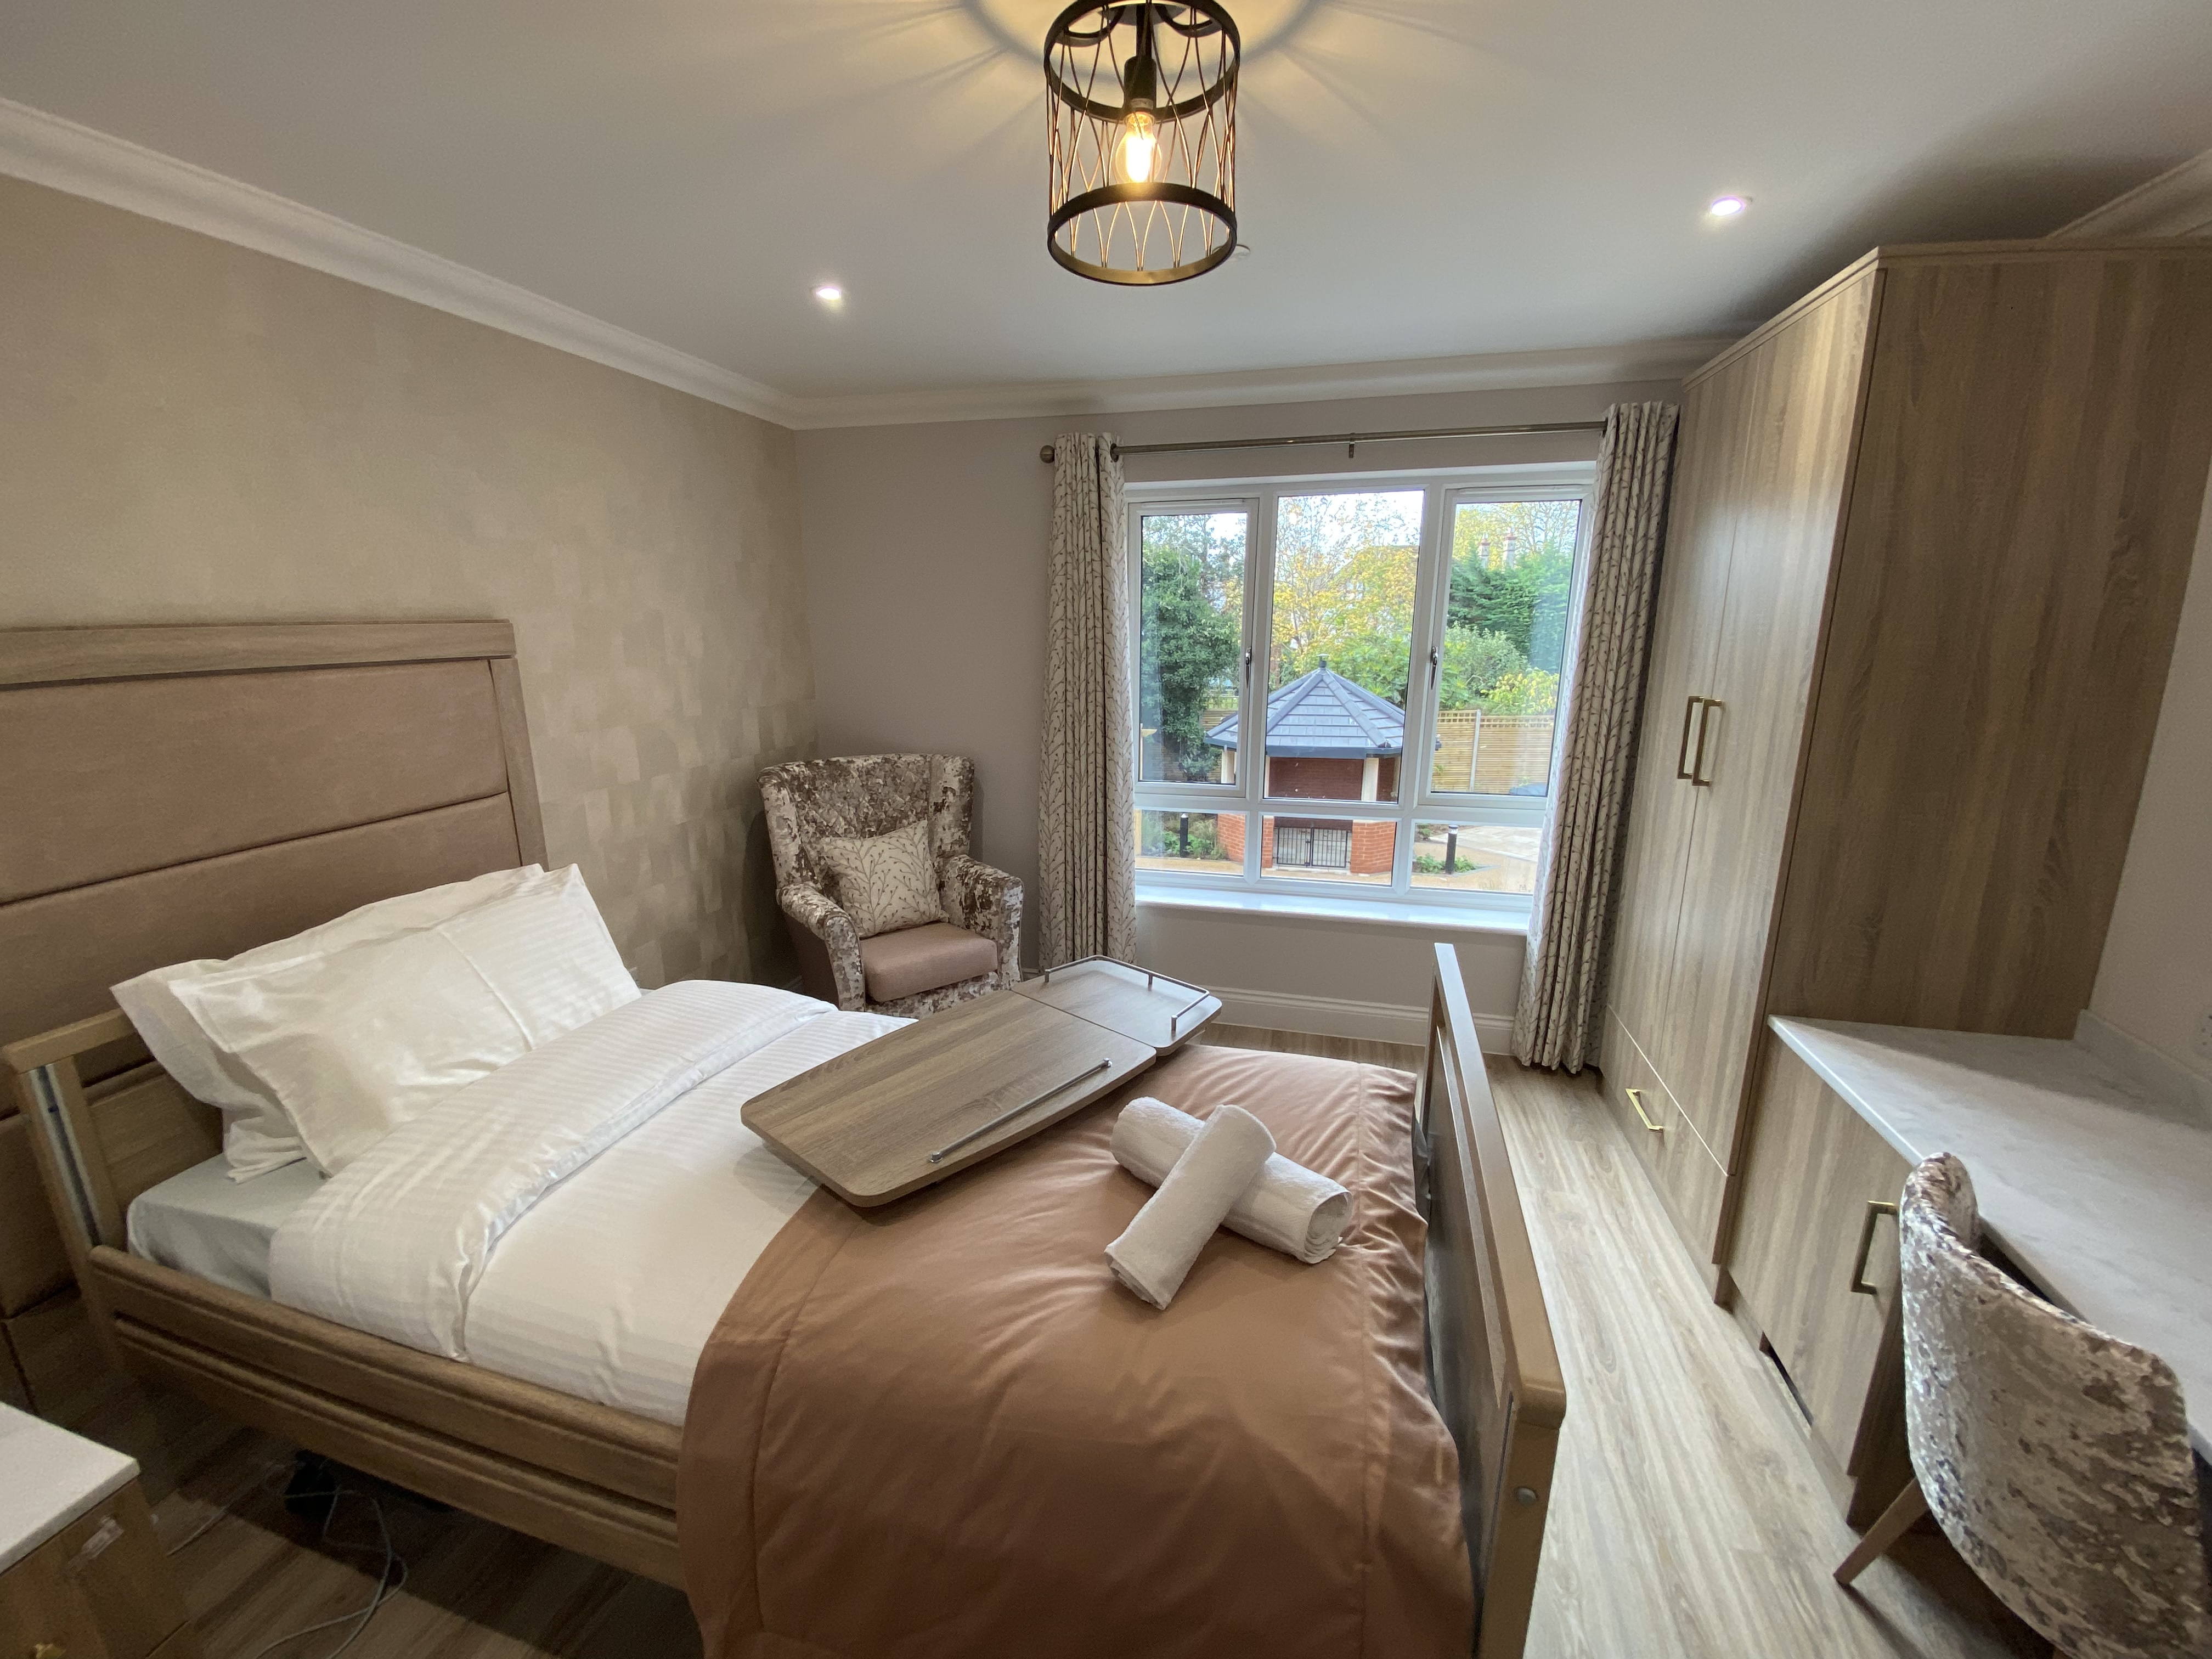 Kailash Manor Luxury Room Care Home Pinner